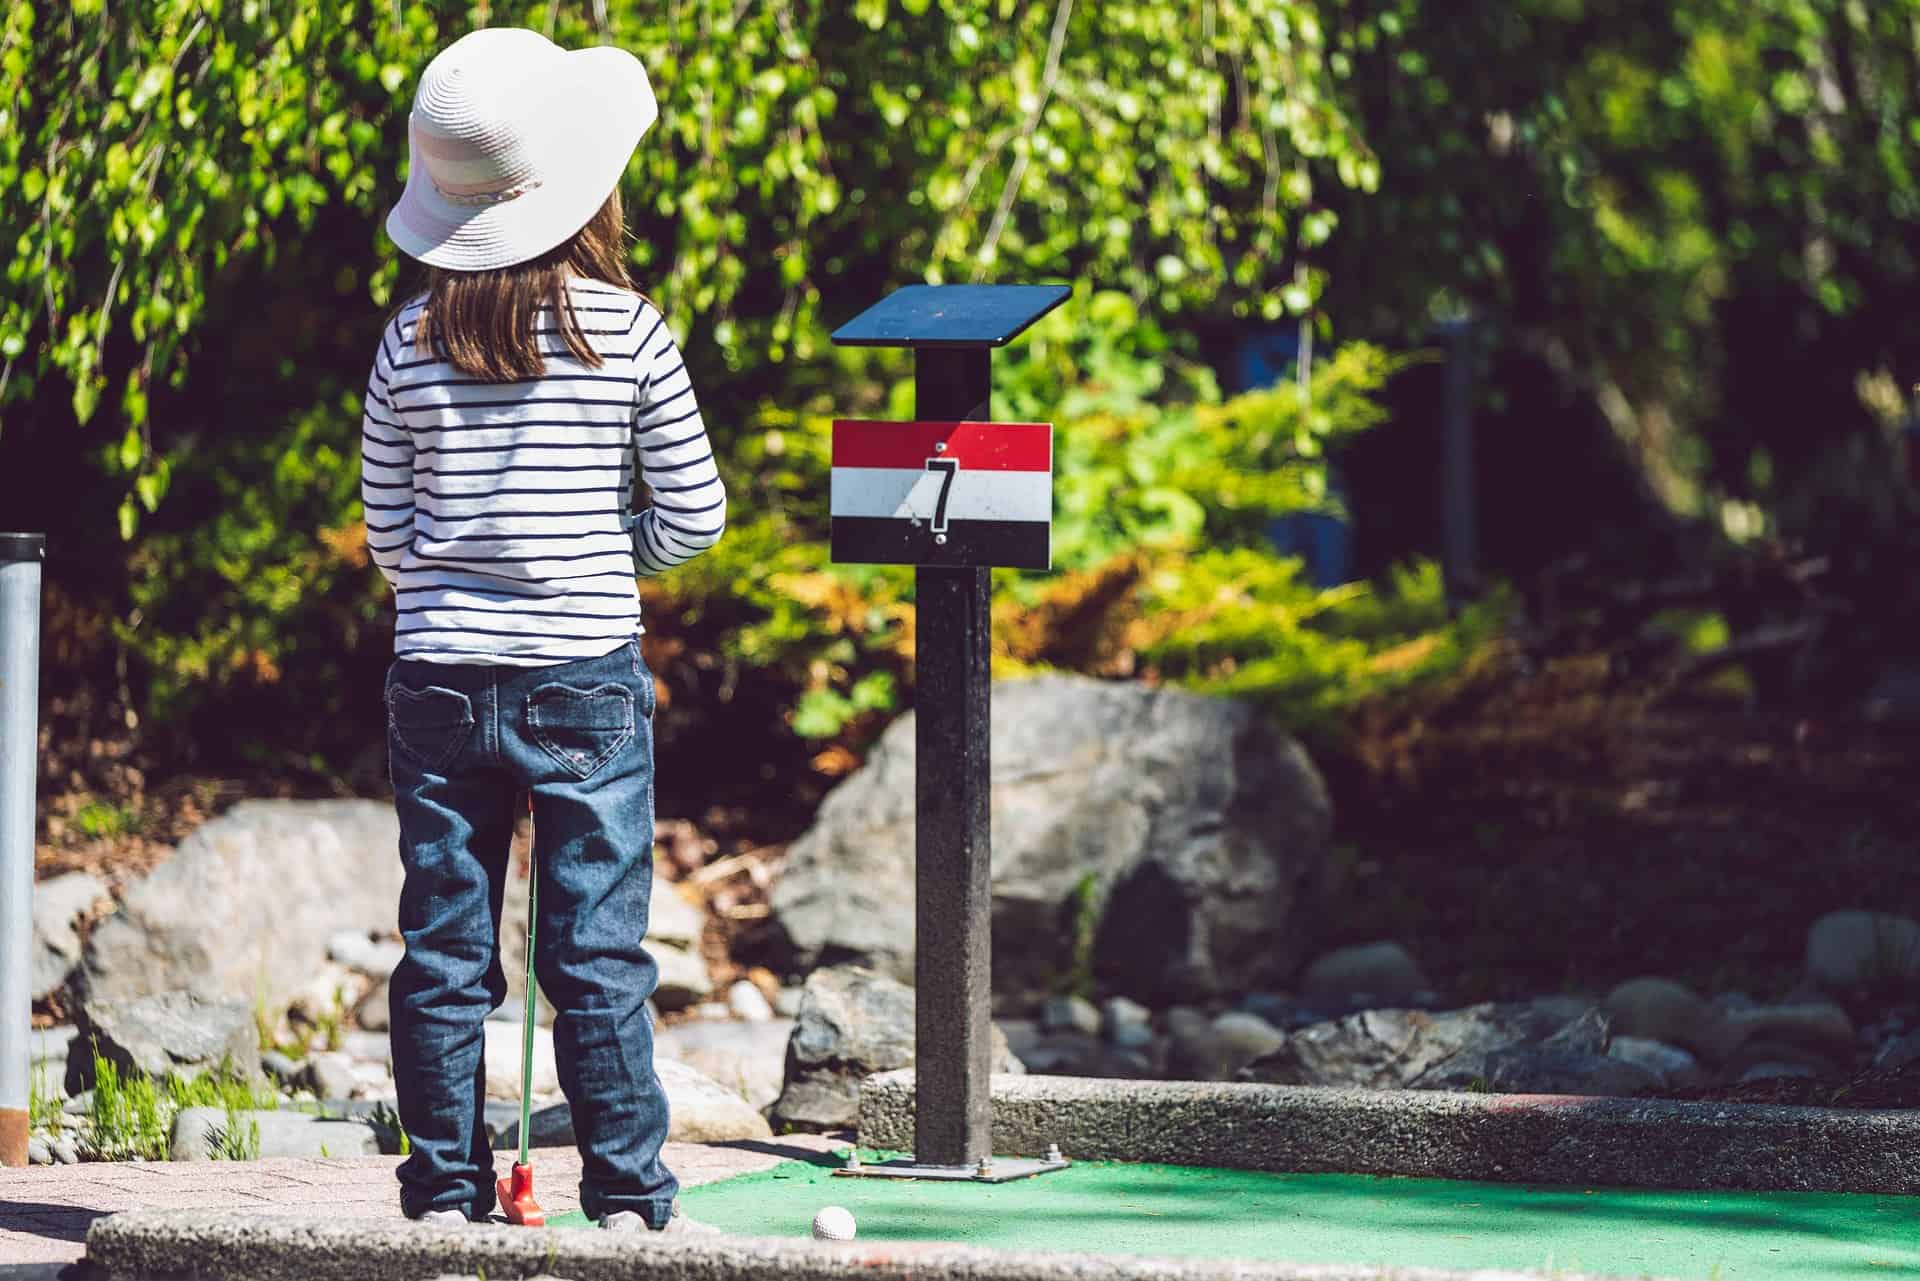 You are currently viewing Kinderabenteuer MAXI goes Minigolf / 2. August